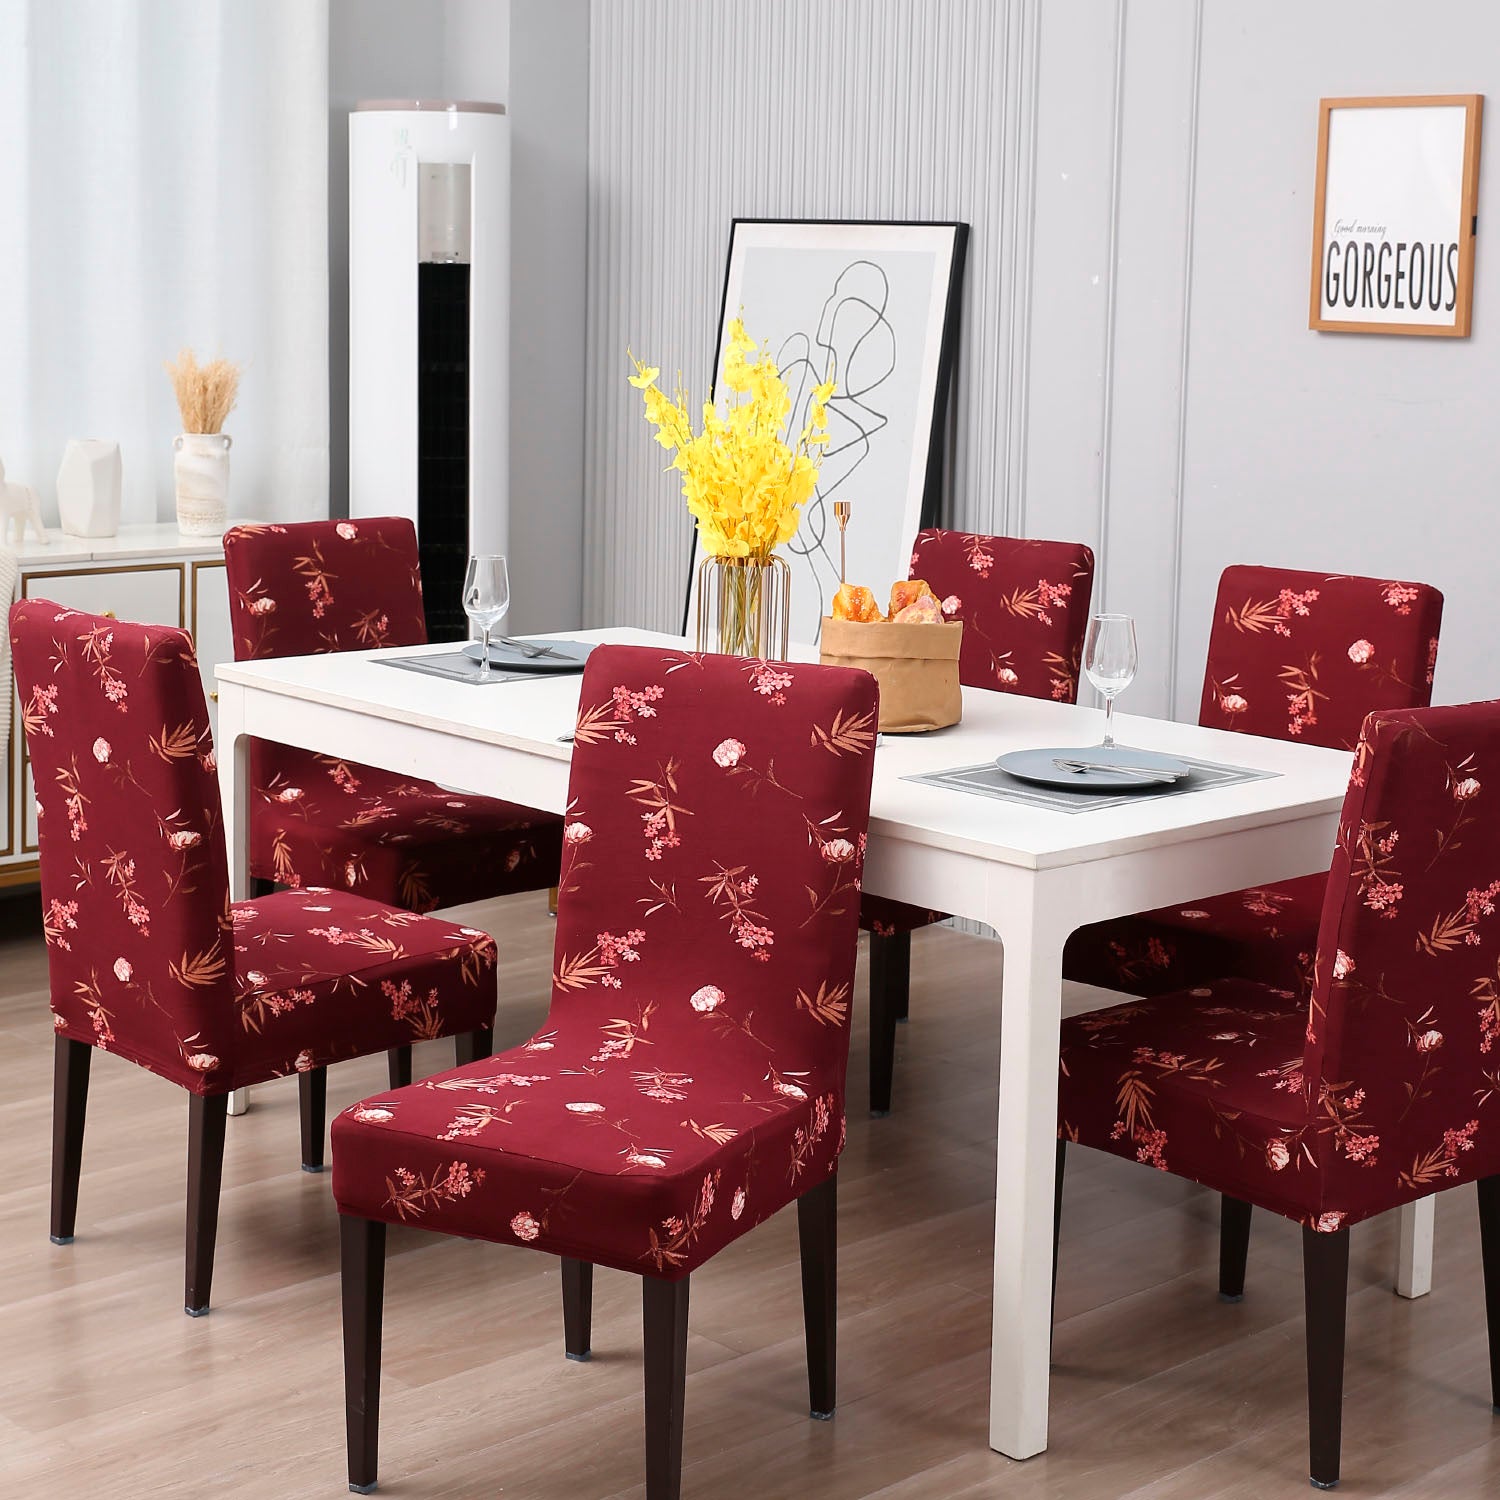 Elastic Stretchable Dining Chair Cover, Wine Leaf